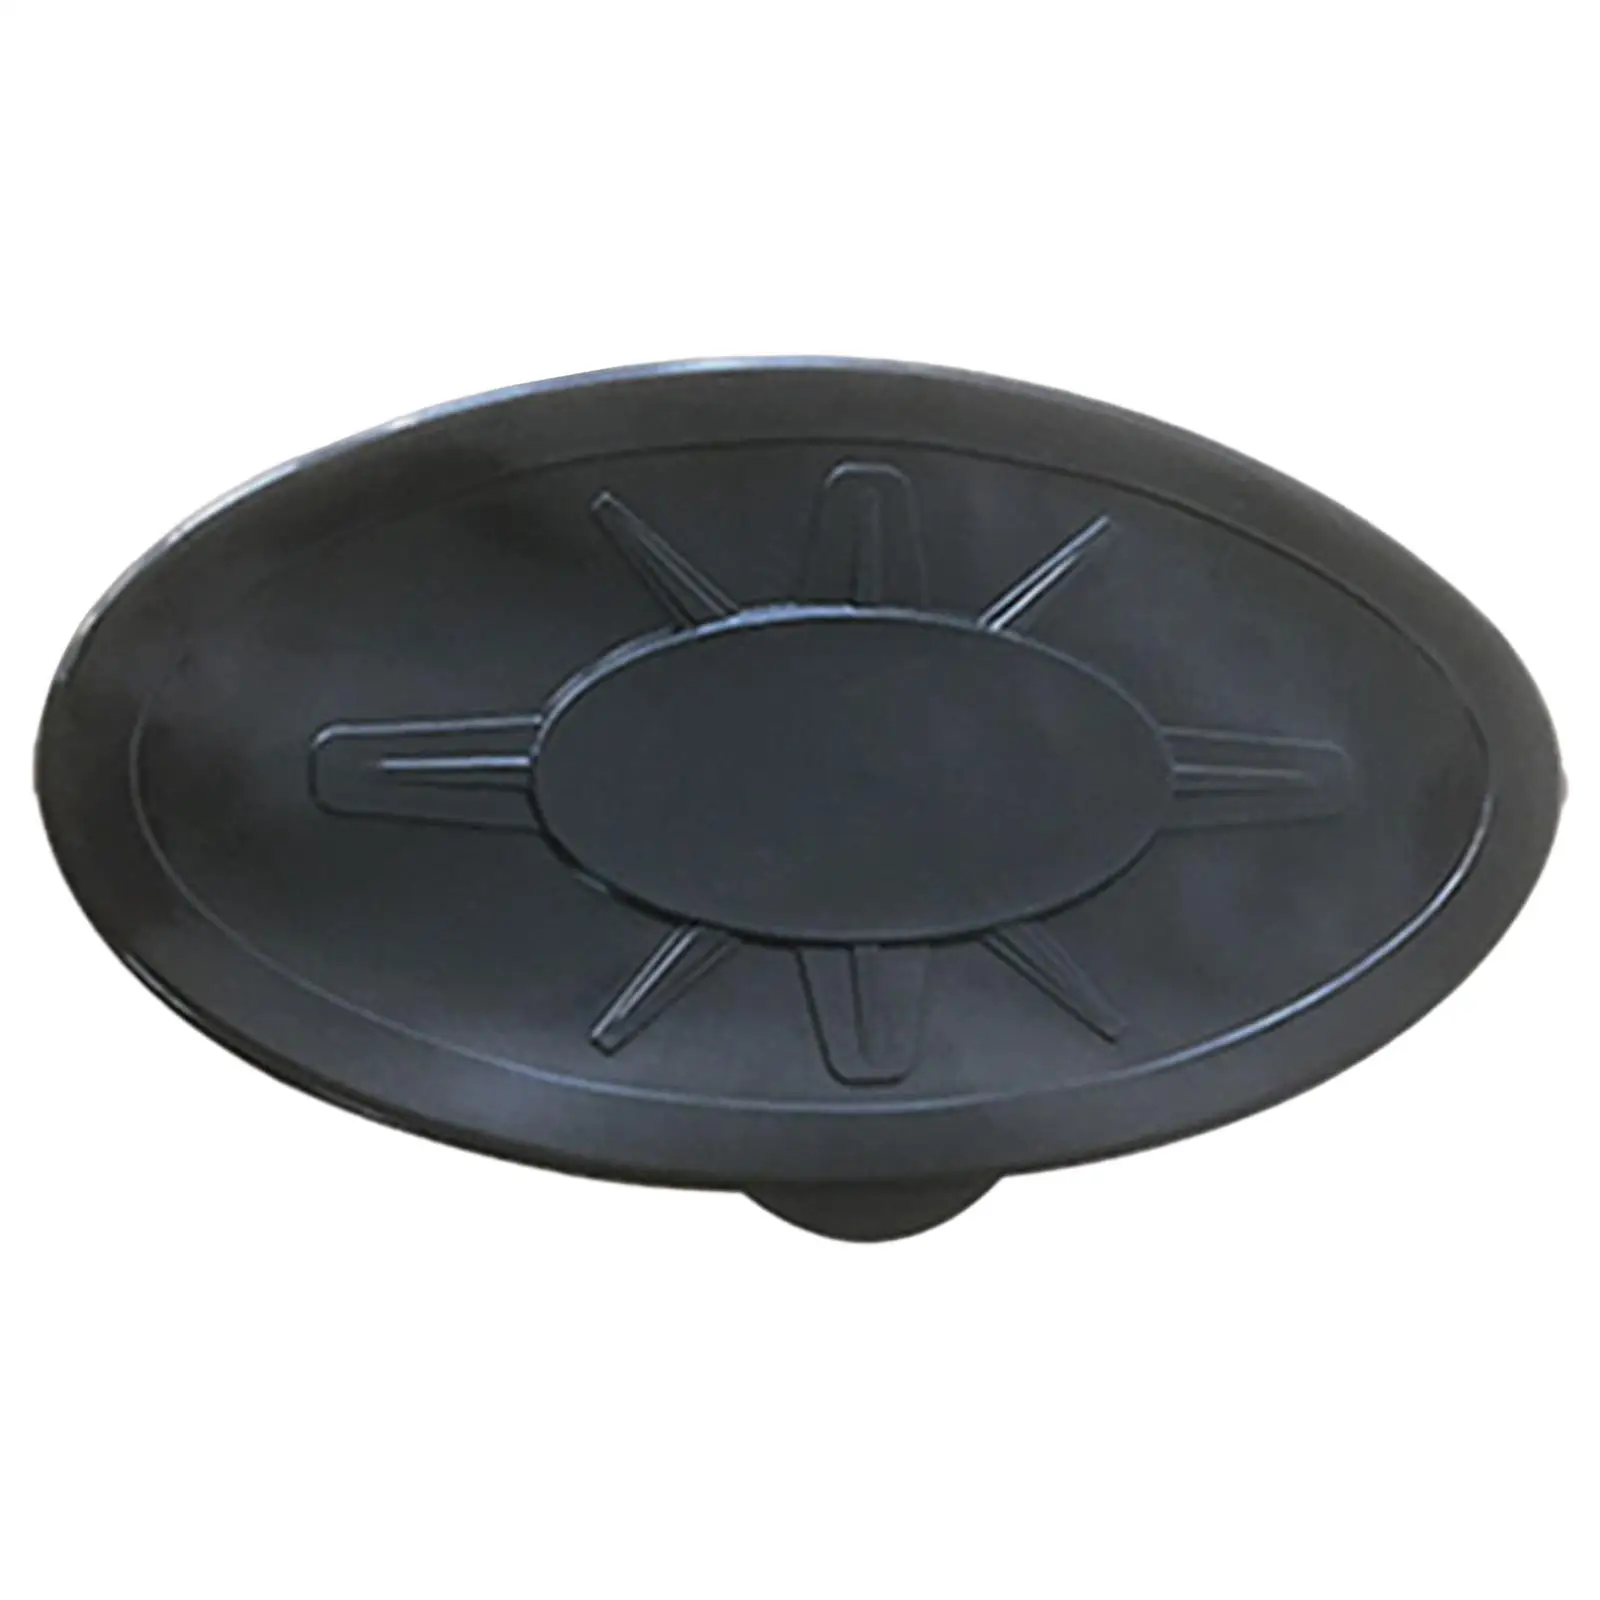 Kayak Hatches 9 inch Round/Oval Lock Hatch Accessories Parts Access Cover Replacement Hatches for Boat Canoes Marine Kayak